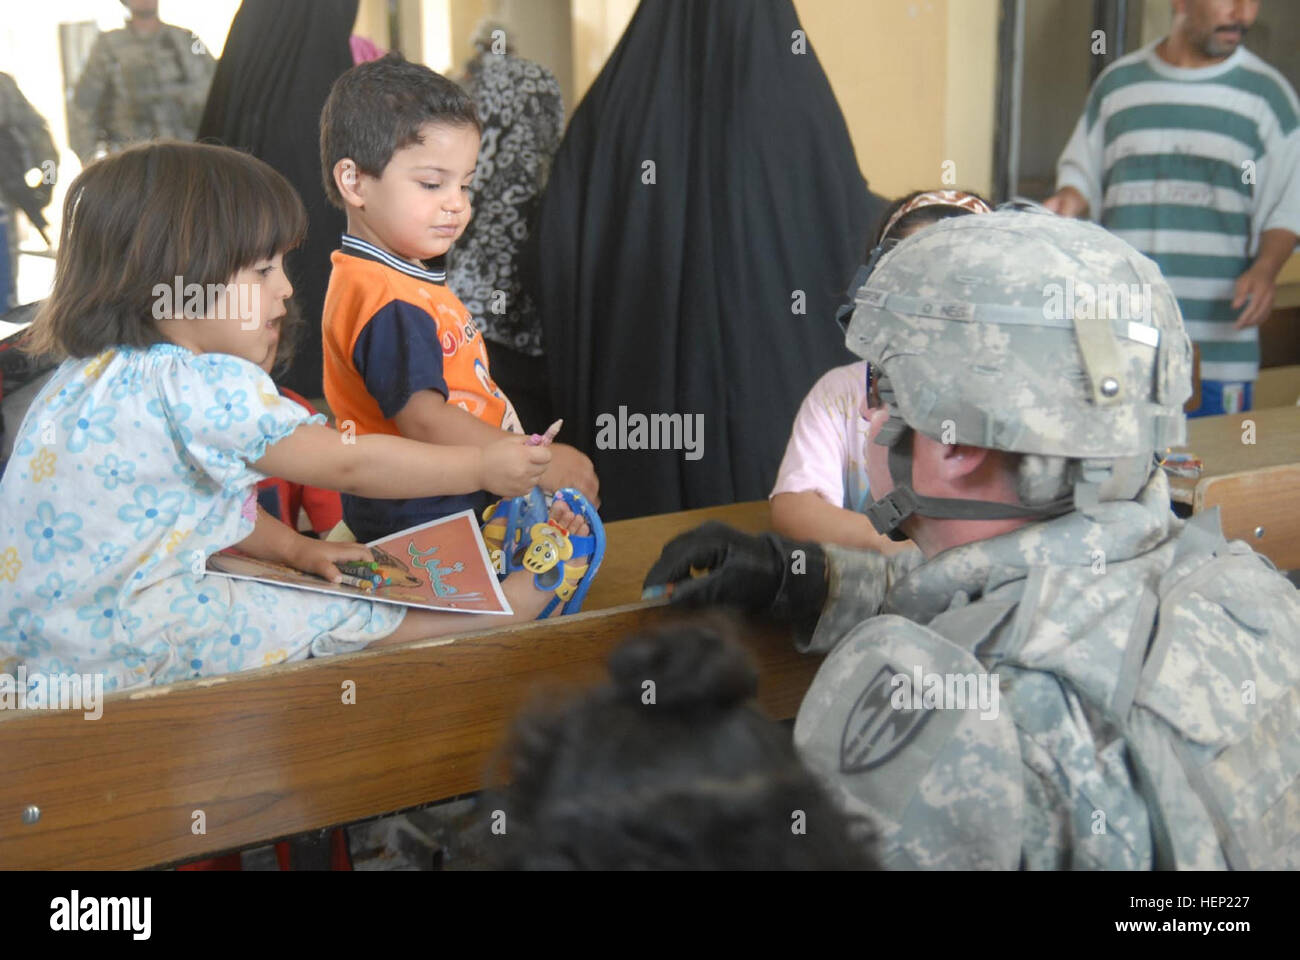 Staff Sgt. Joseph Reinsburrow, 64th Military Police Company, who is a native of Towanda, Pa., interacts with the children of Hurriyah on June 12 while Iraqi police and Multi-National Division - Baghdad hand out toys and school supplies to the local children. The 64th MP Co., is deployed from Fort Hood, Texas and is currently assigned to the 716th MP Battalion, 18th MP Bde., MND-B. IP making difference in local Baghdad community 94494 Stock Photo